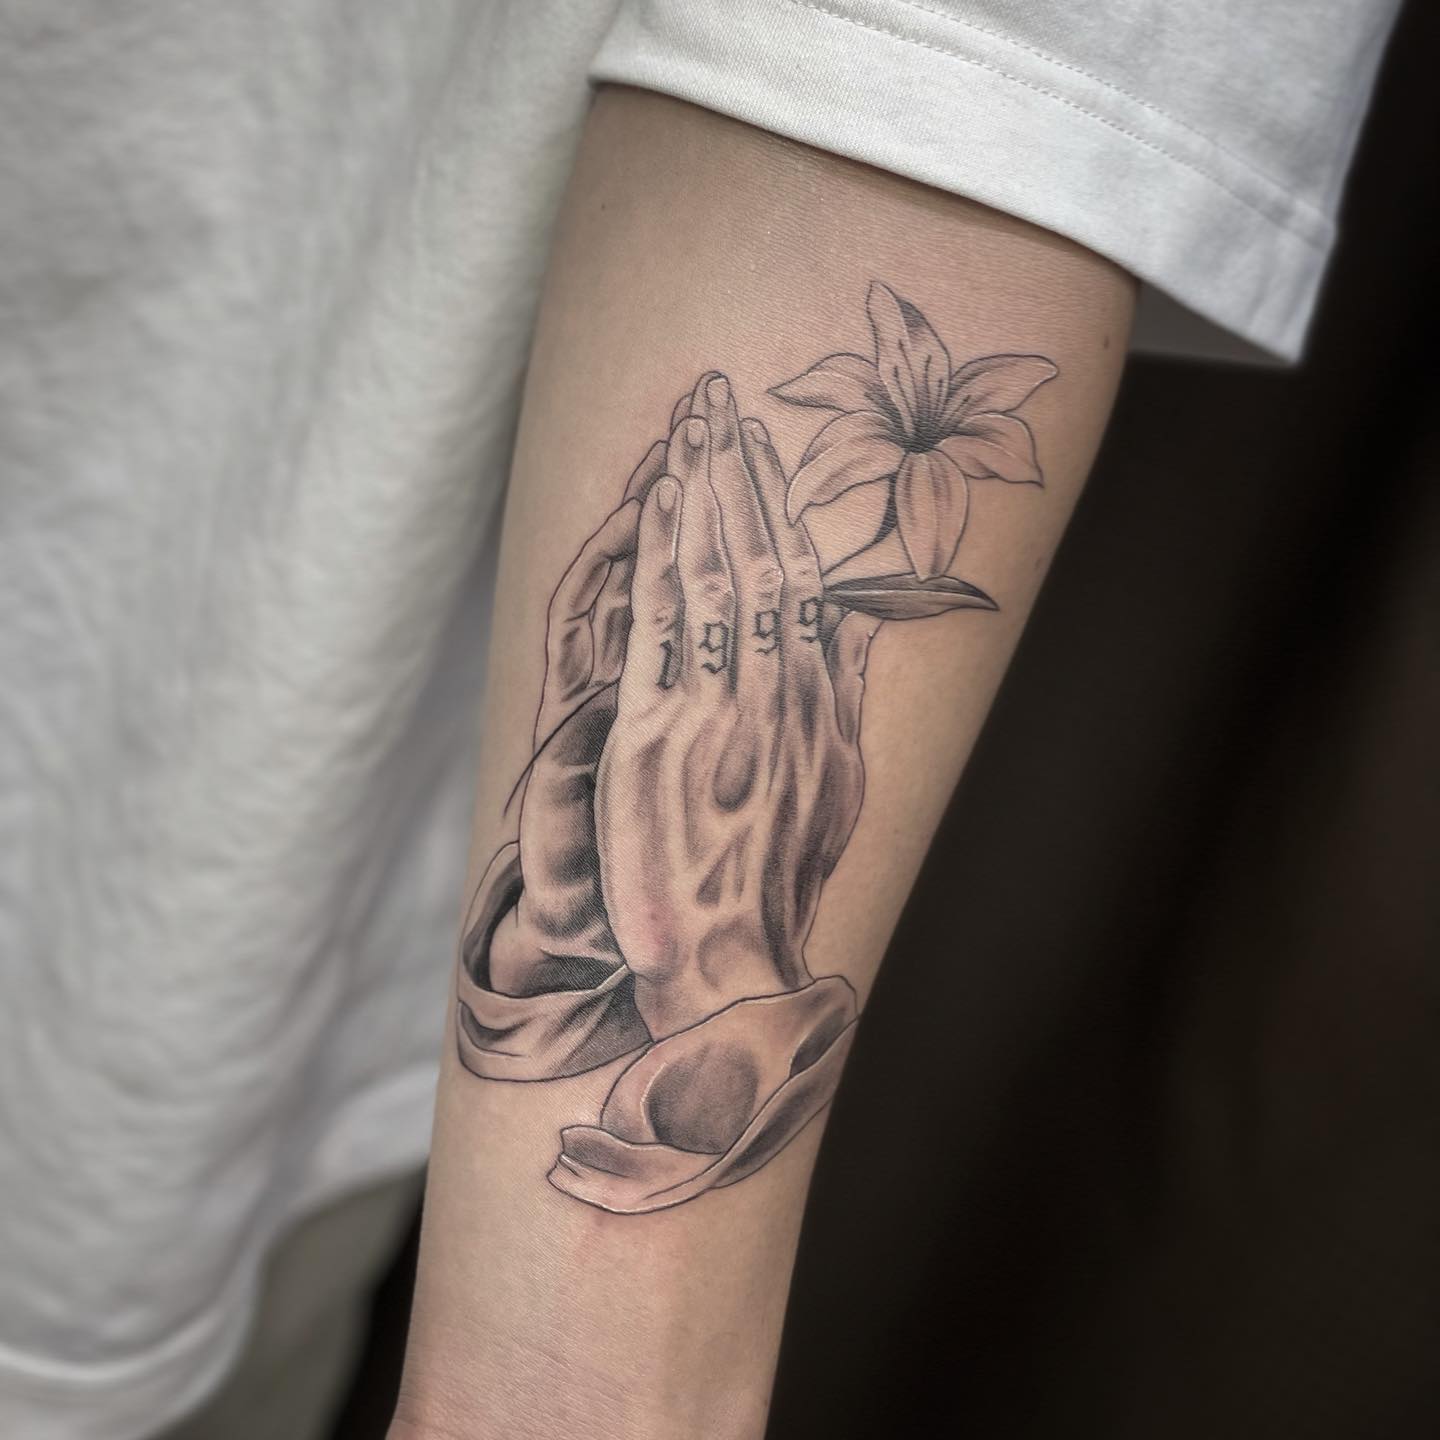 Ask your tattooist to ink a date that has a meaning for you on this sacred tattoo. It can be your birth date, so you can thank your God for your presence in that way.